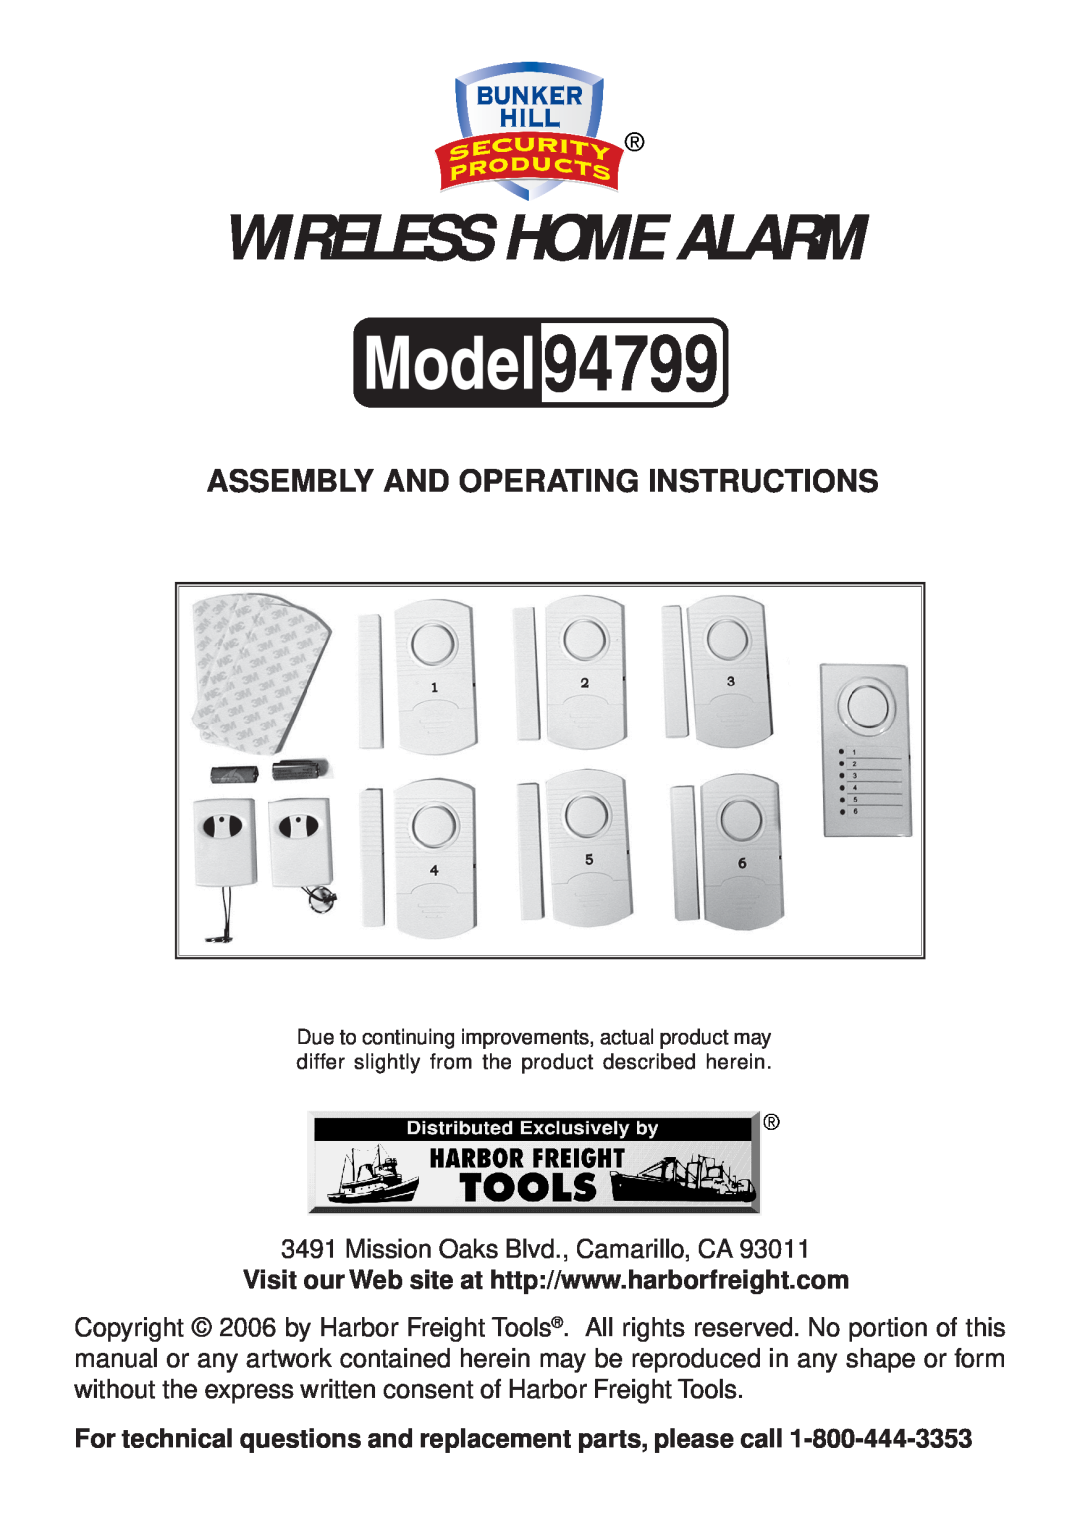 Harbor Freight Tools 94799 manual Assembly And Operating Instructions, Wireless Home Alarm 